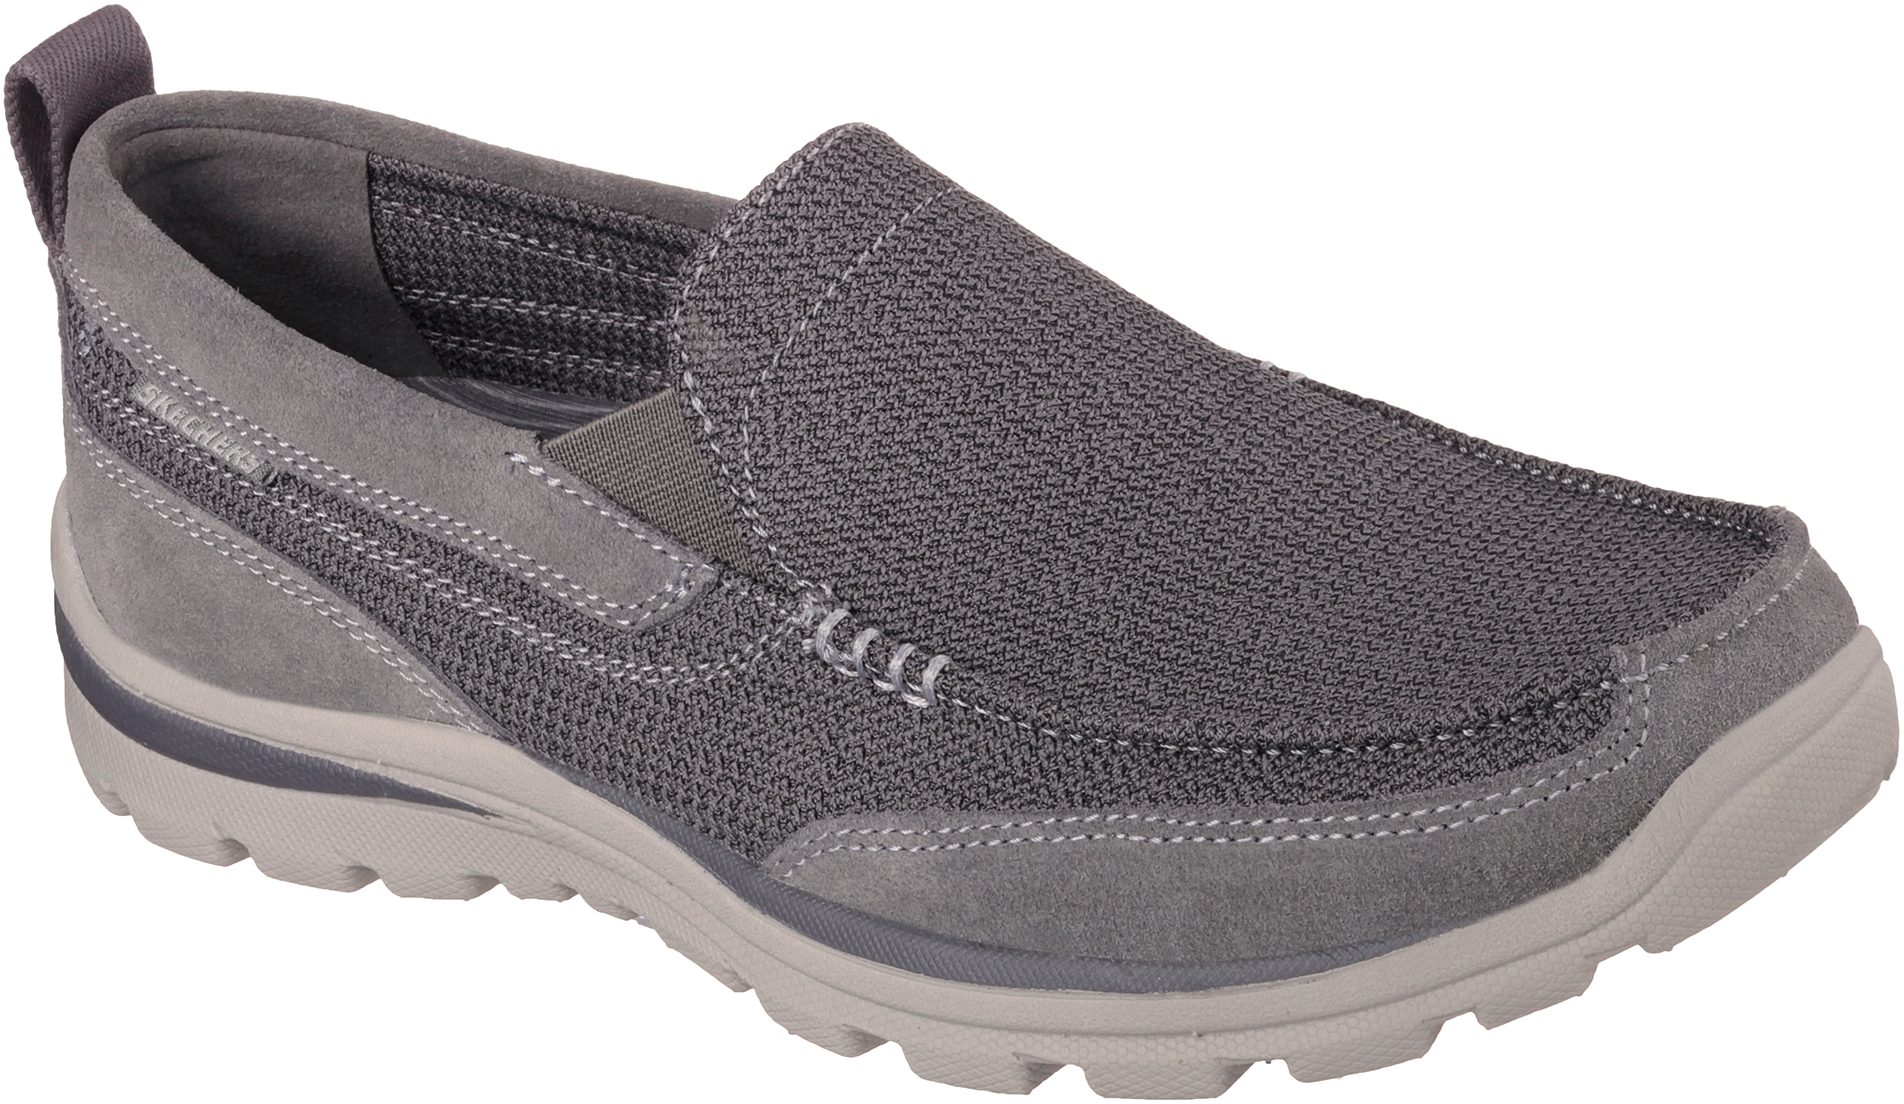 Skechers Superior - Milford Charcoal 64365 CCGY - Casual Shoes ...